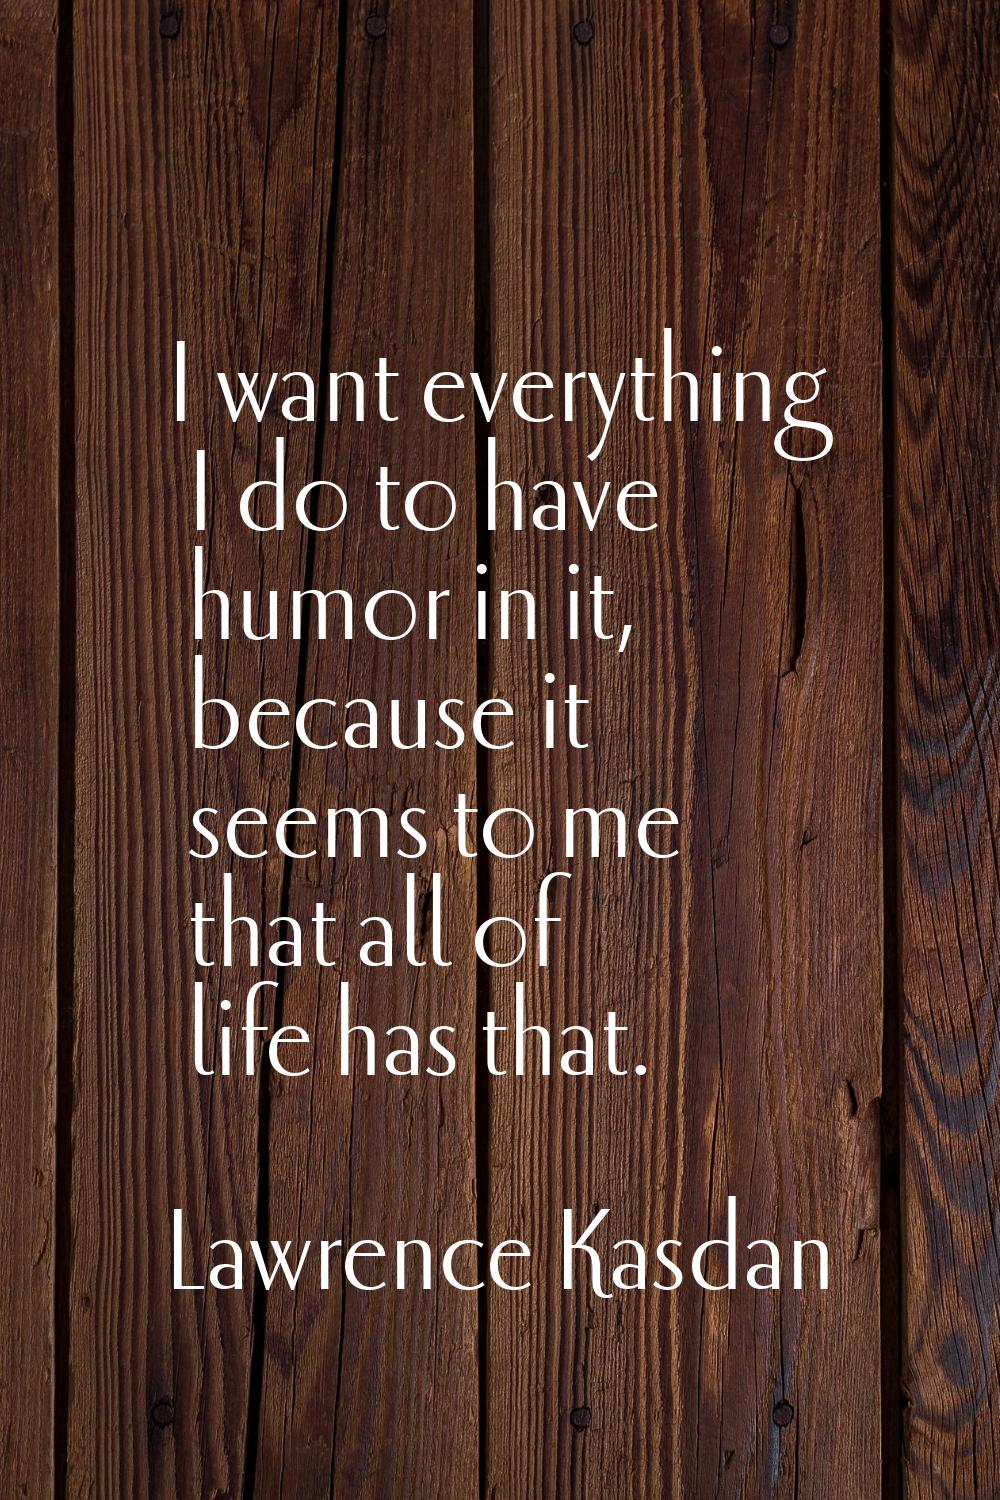 I want everything I do to have humor in it, because it seems to me that all of life has that.